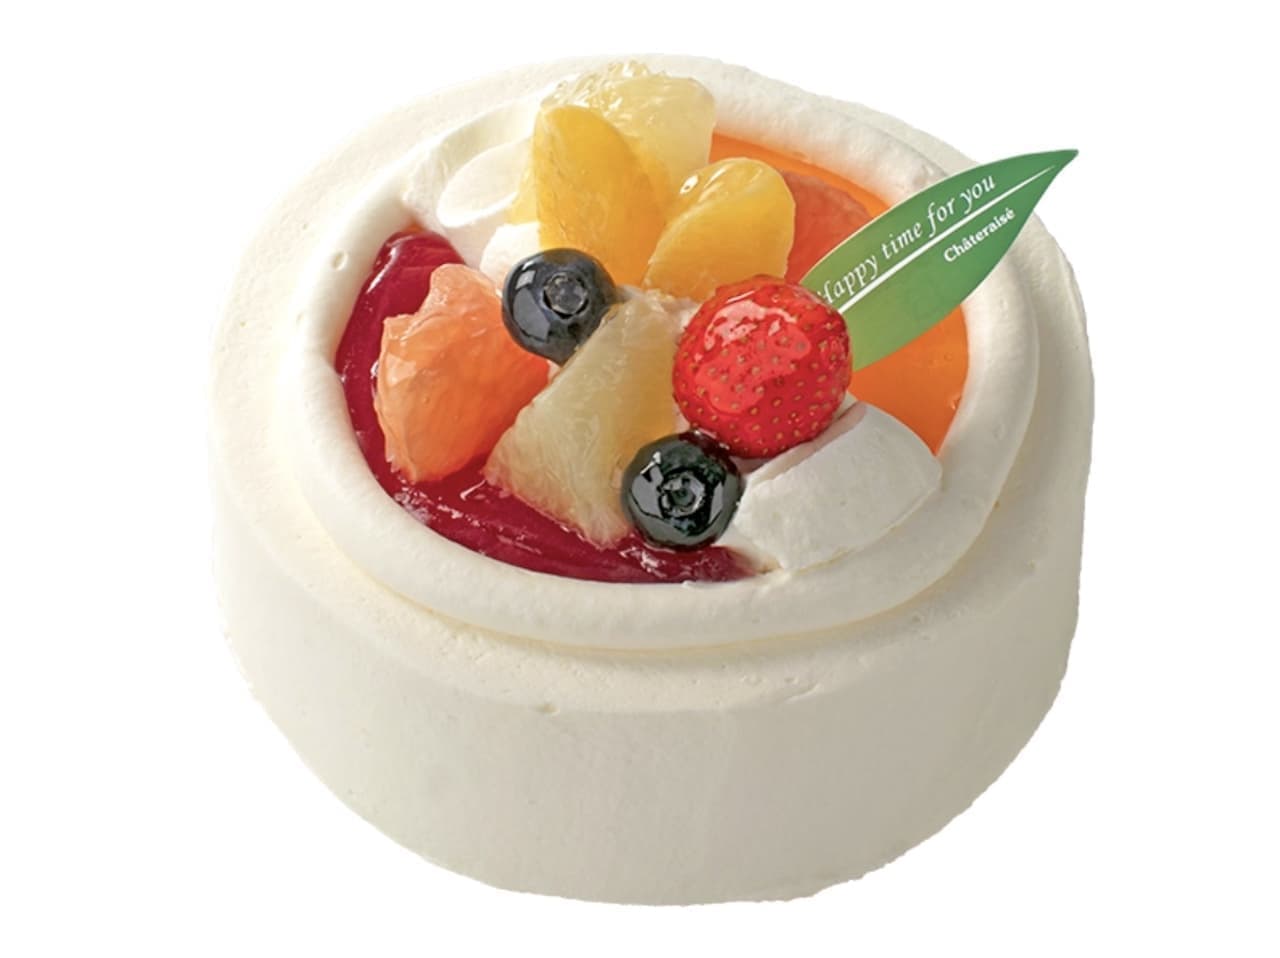 Chateraise "Strawberry and Citrus Soufflé Cheese Decoration